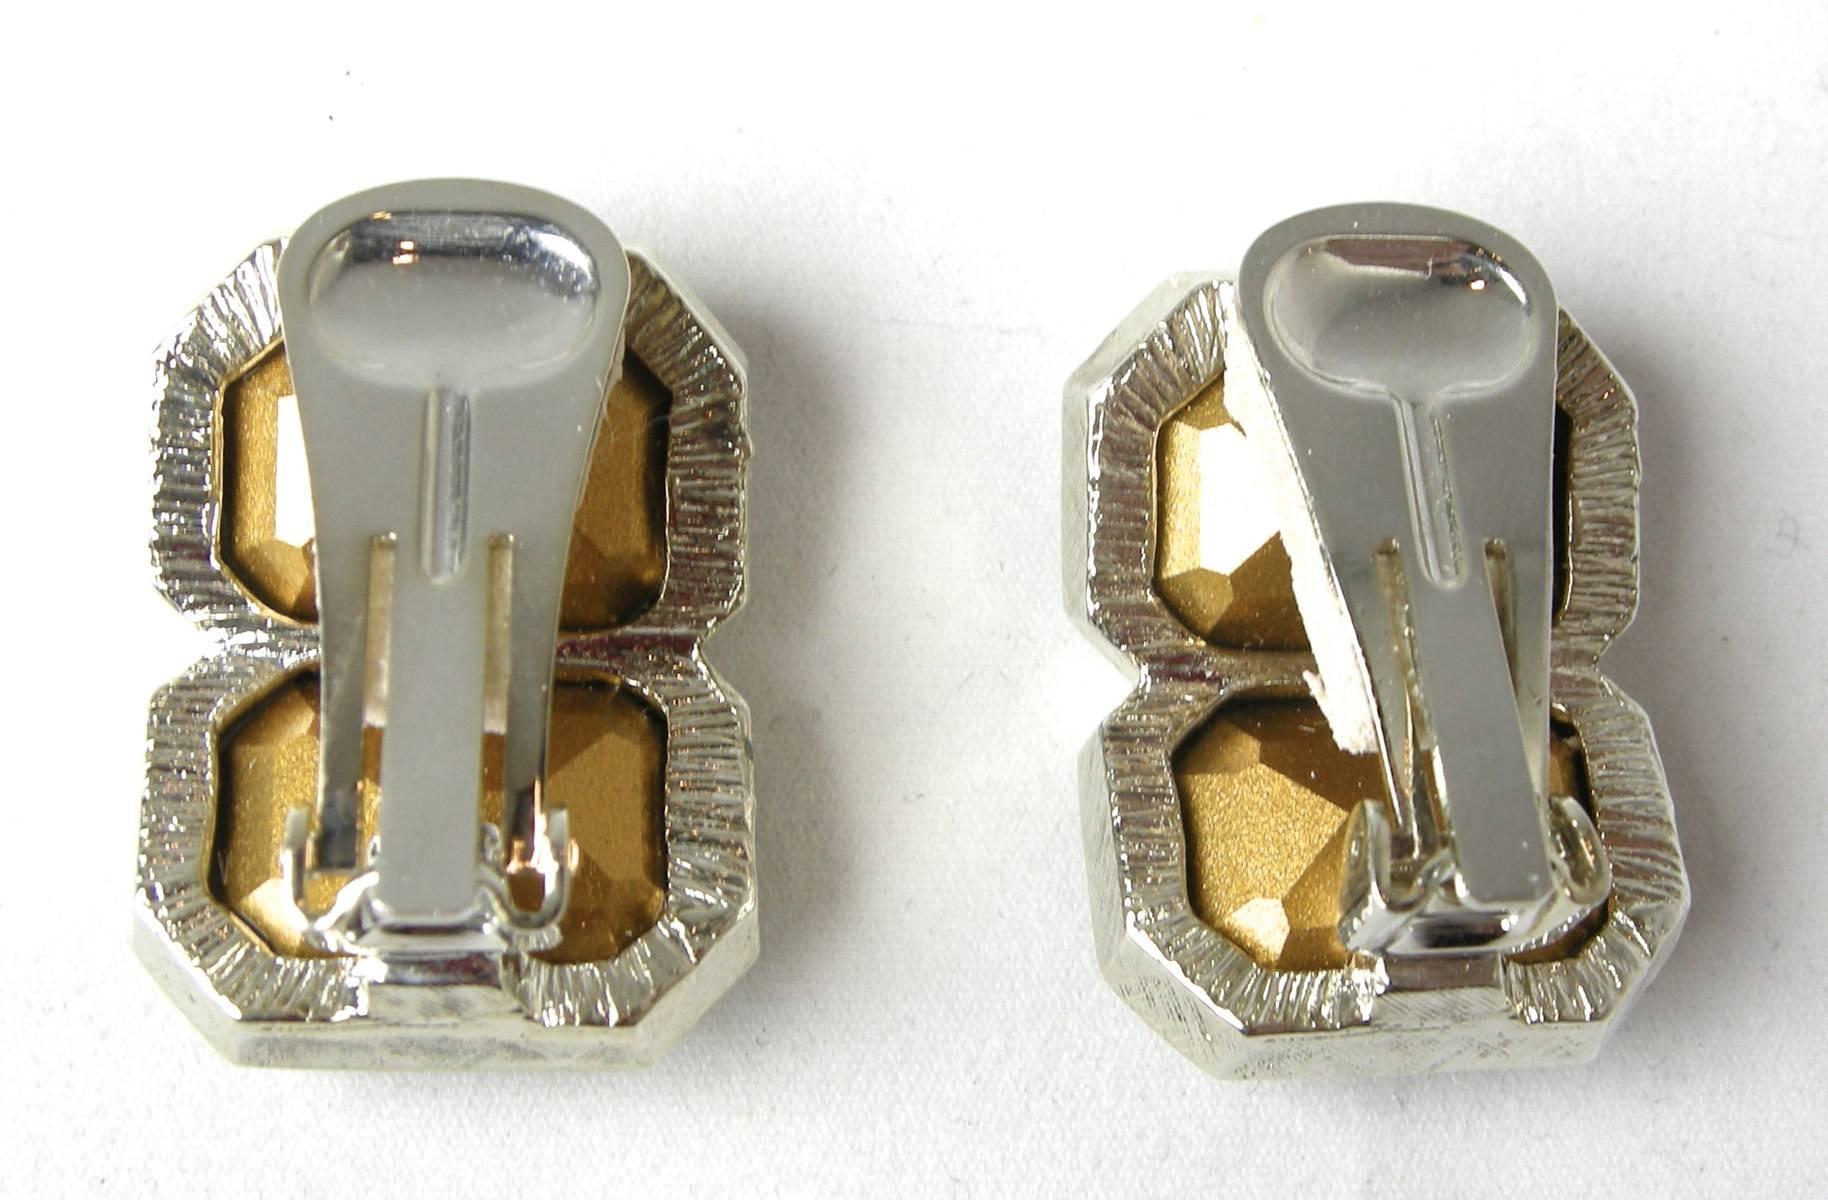 The beautiful clip earrings by Kenneth Jay Lane have a two faux sapphire crystals bezel into a curved silver tone metal finish. They measure 1” long x 7/8” wide.  They are signed “Kenneth Lane” and in excellent condition.